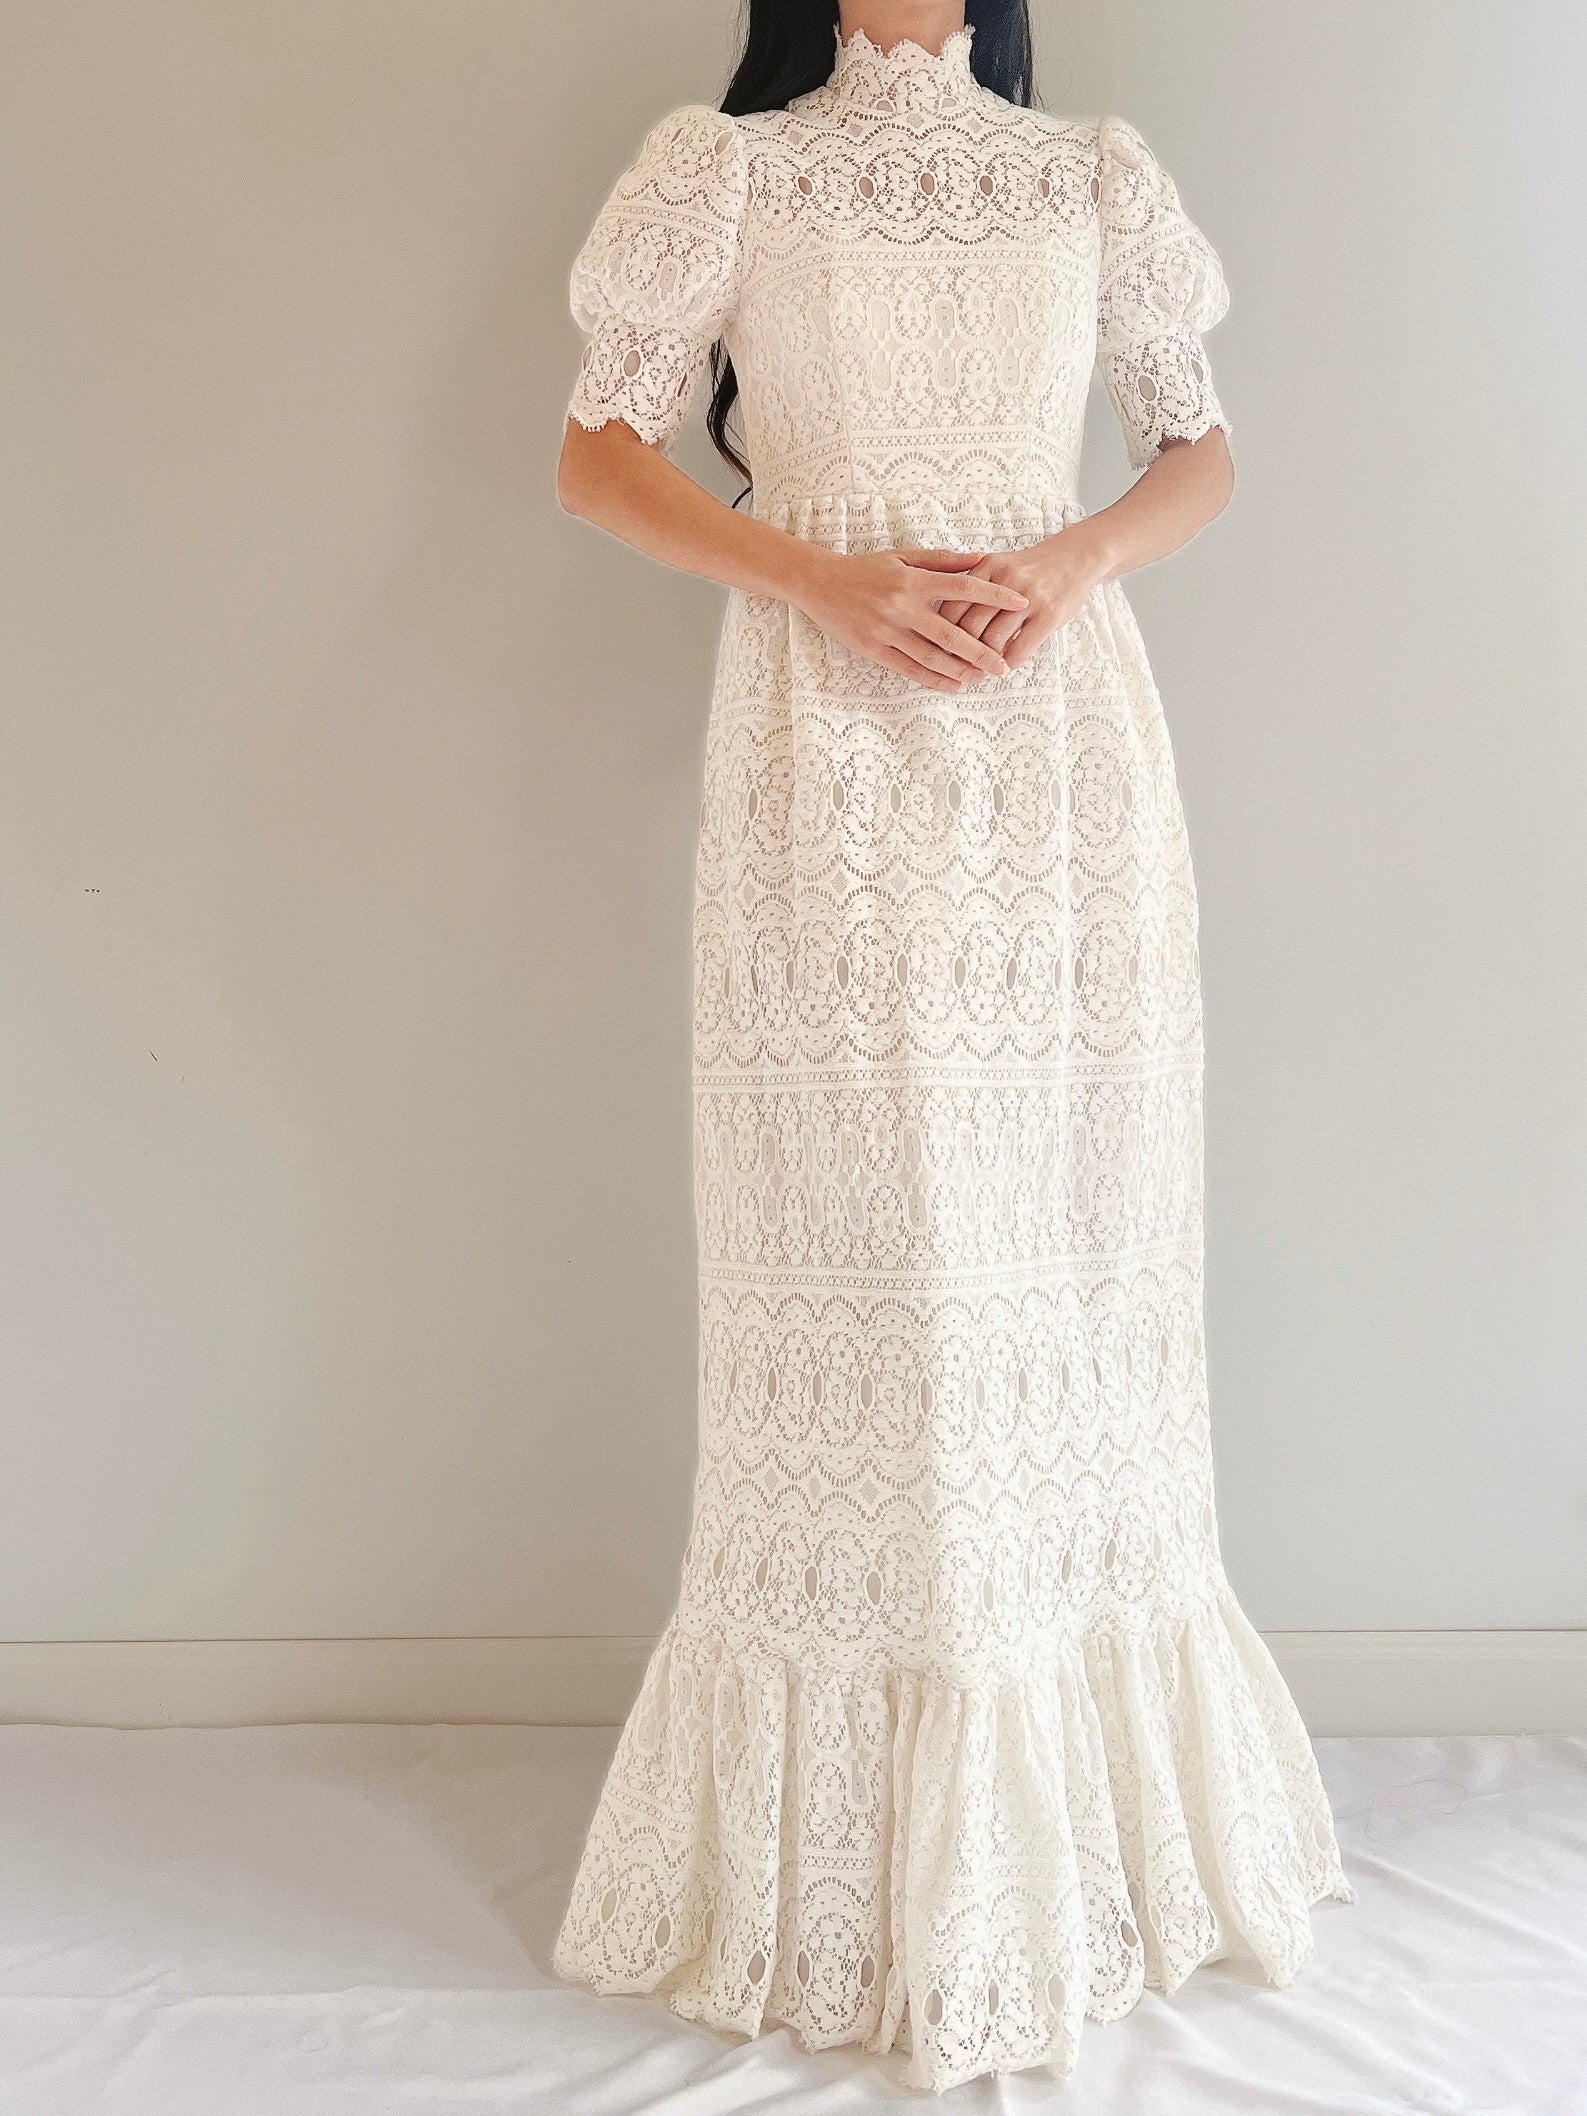 Vintage Puff Sleeve Lace Dress - XS